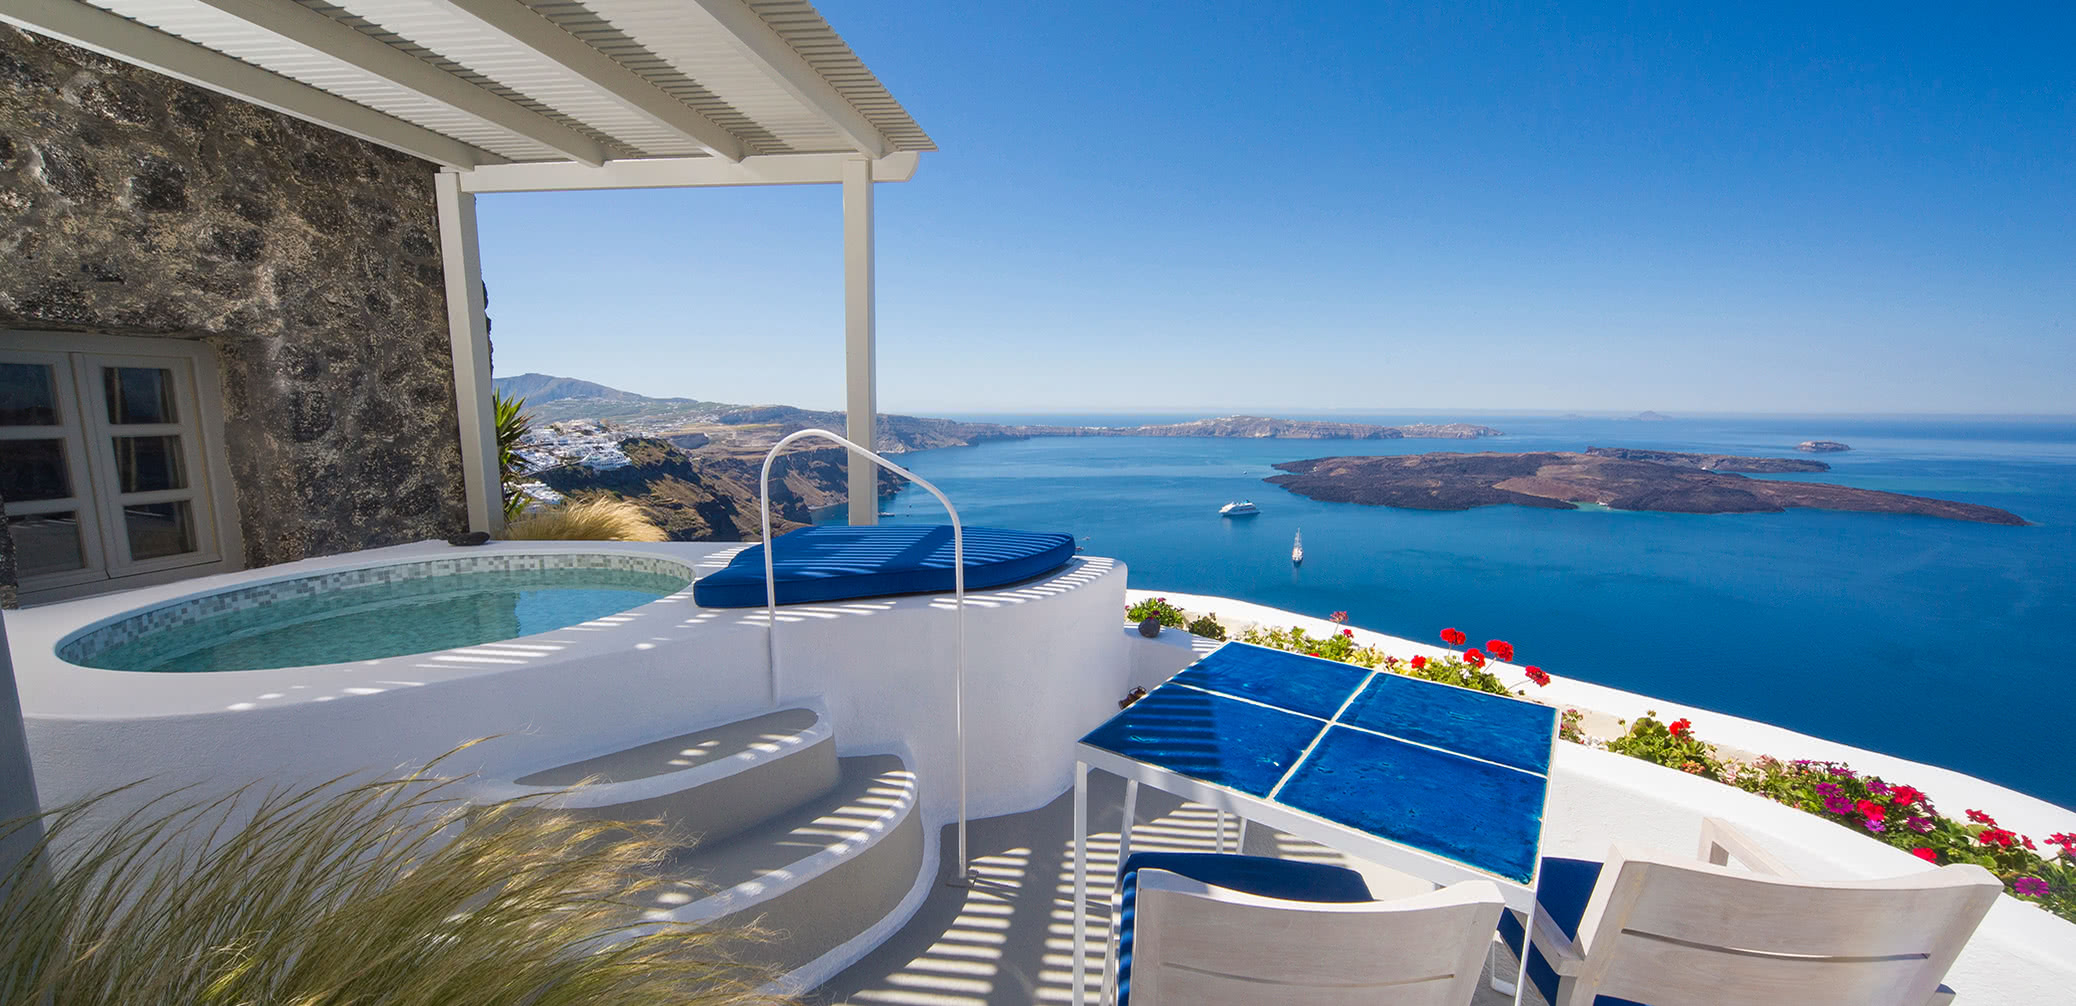 Best Hotels With A View In Santorini